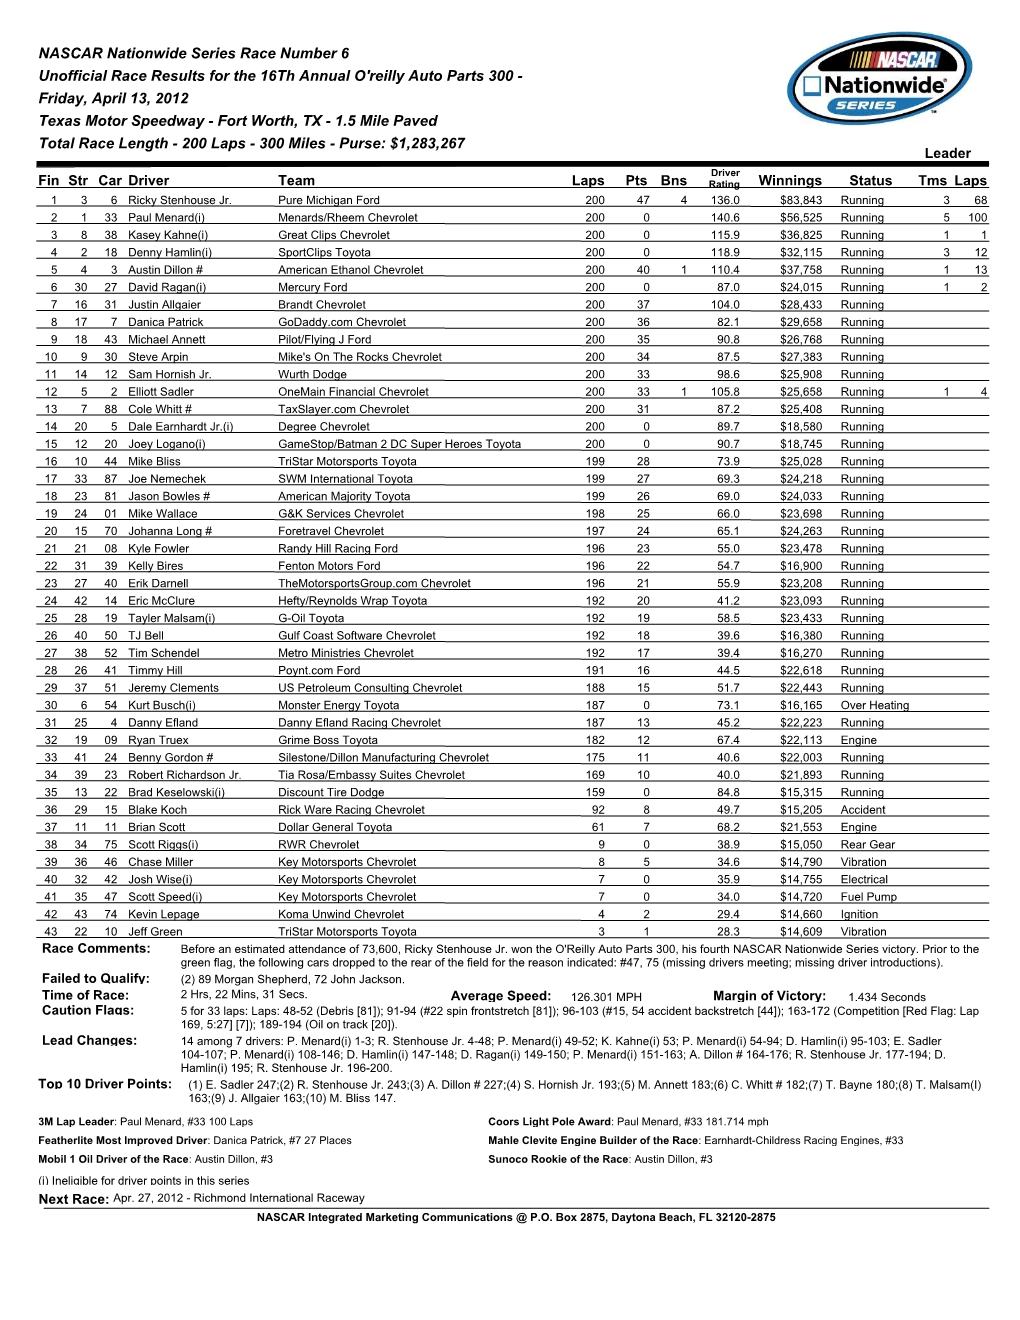 NASCAR Nationwide Series Race Number 6 Unofficial Race Results